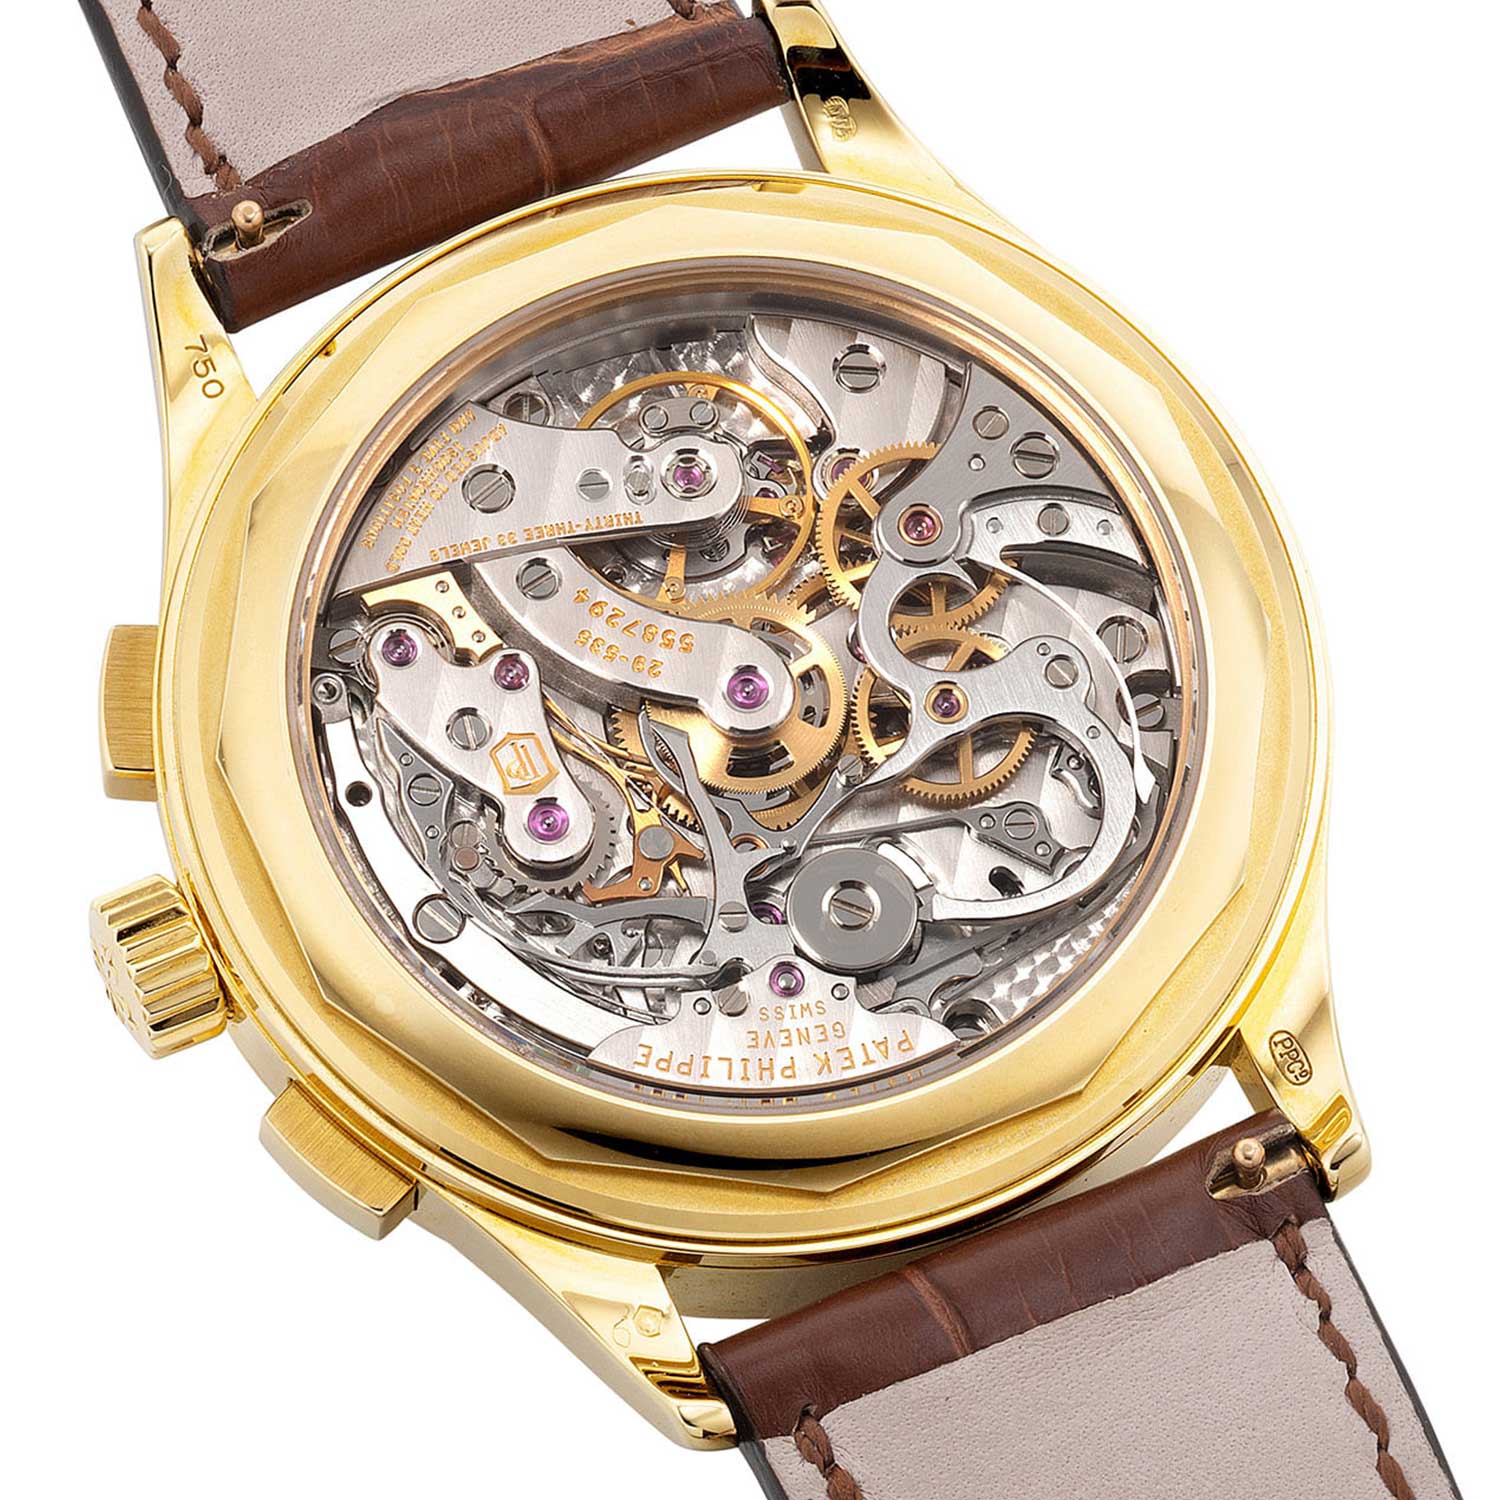 Caseback view of the 2010 Patek Philippe Ref. 5170J showcasing the calibre CH 29-535 PS (Image: Phillips.com)